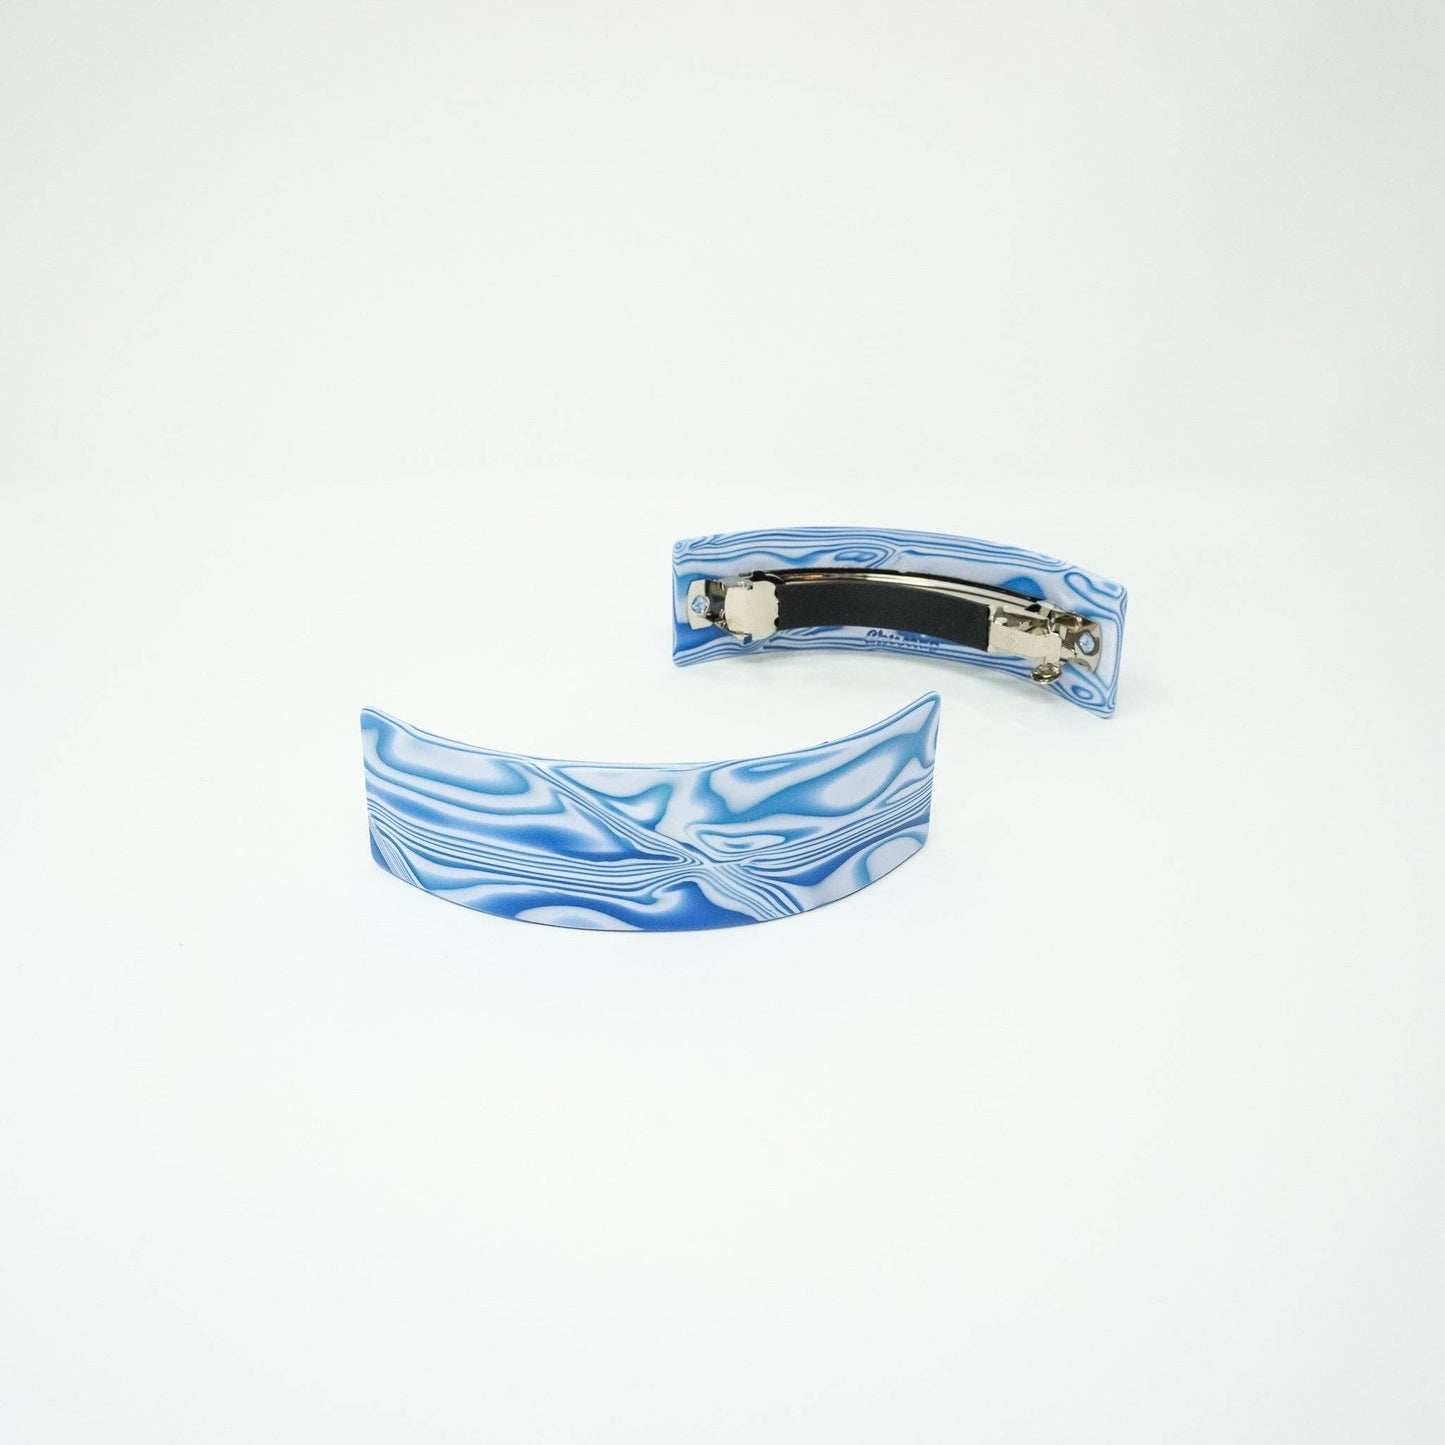 Pony Clip in Marbled Blue